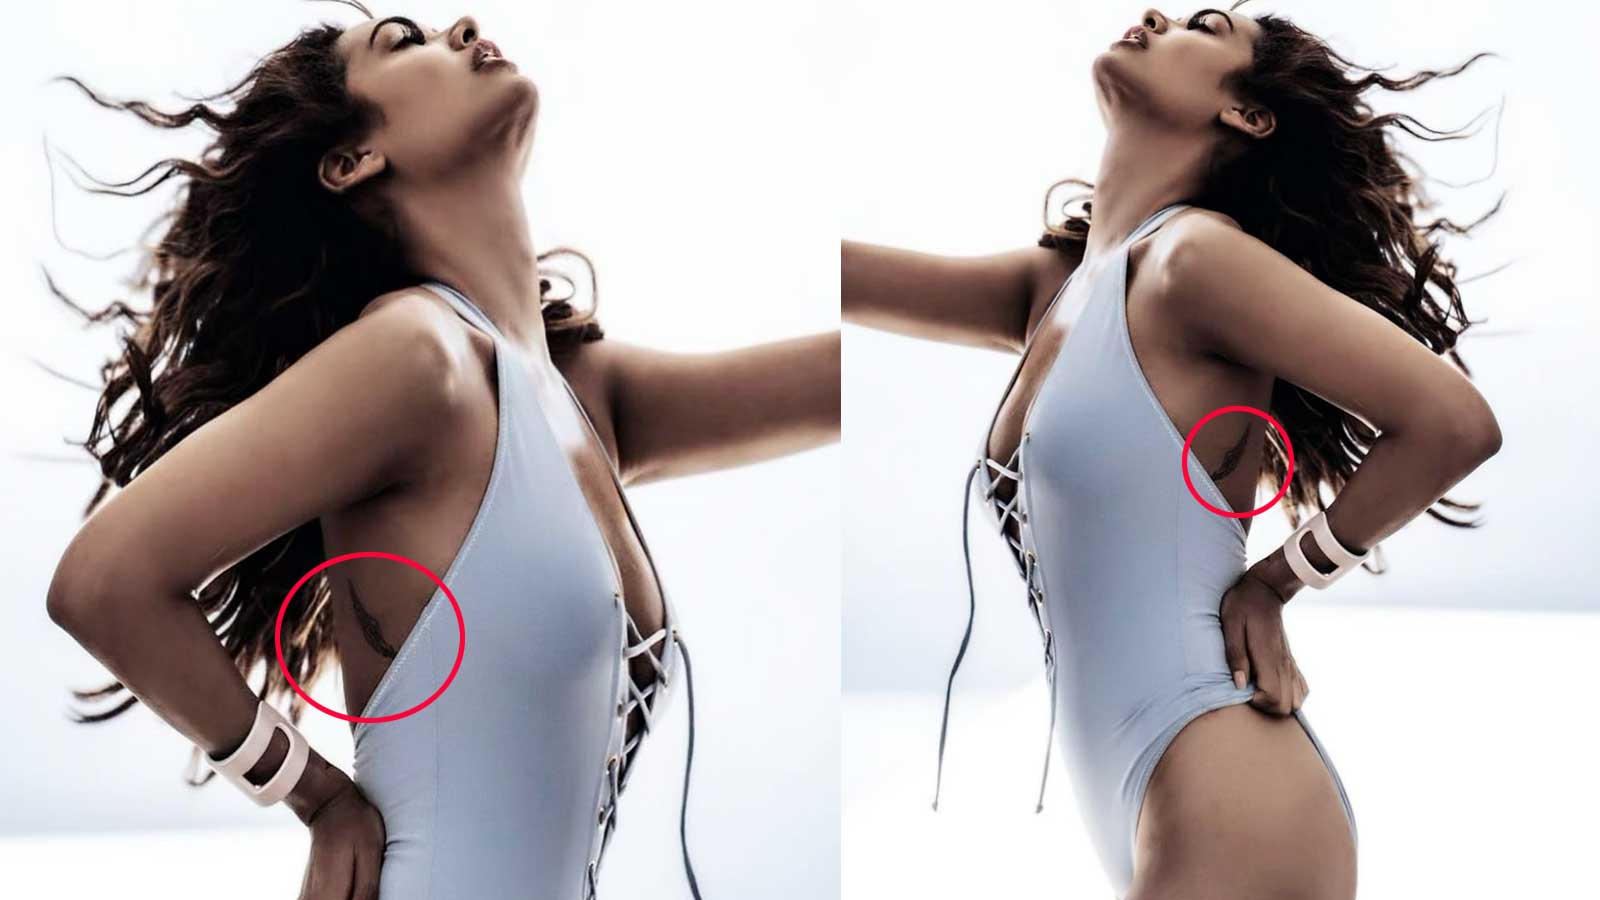 Esha Gupta pictures exposes her secret tattoo  Page 2 of 2   ProudlyIMperfect